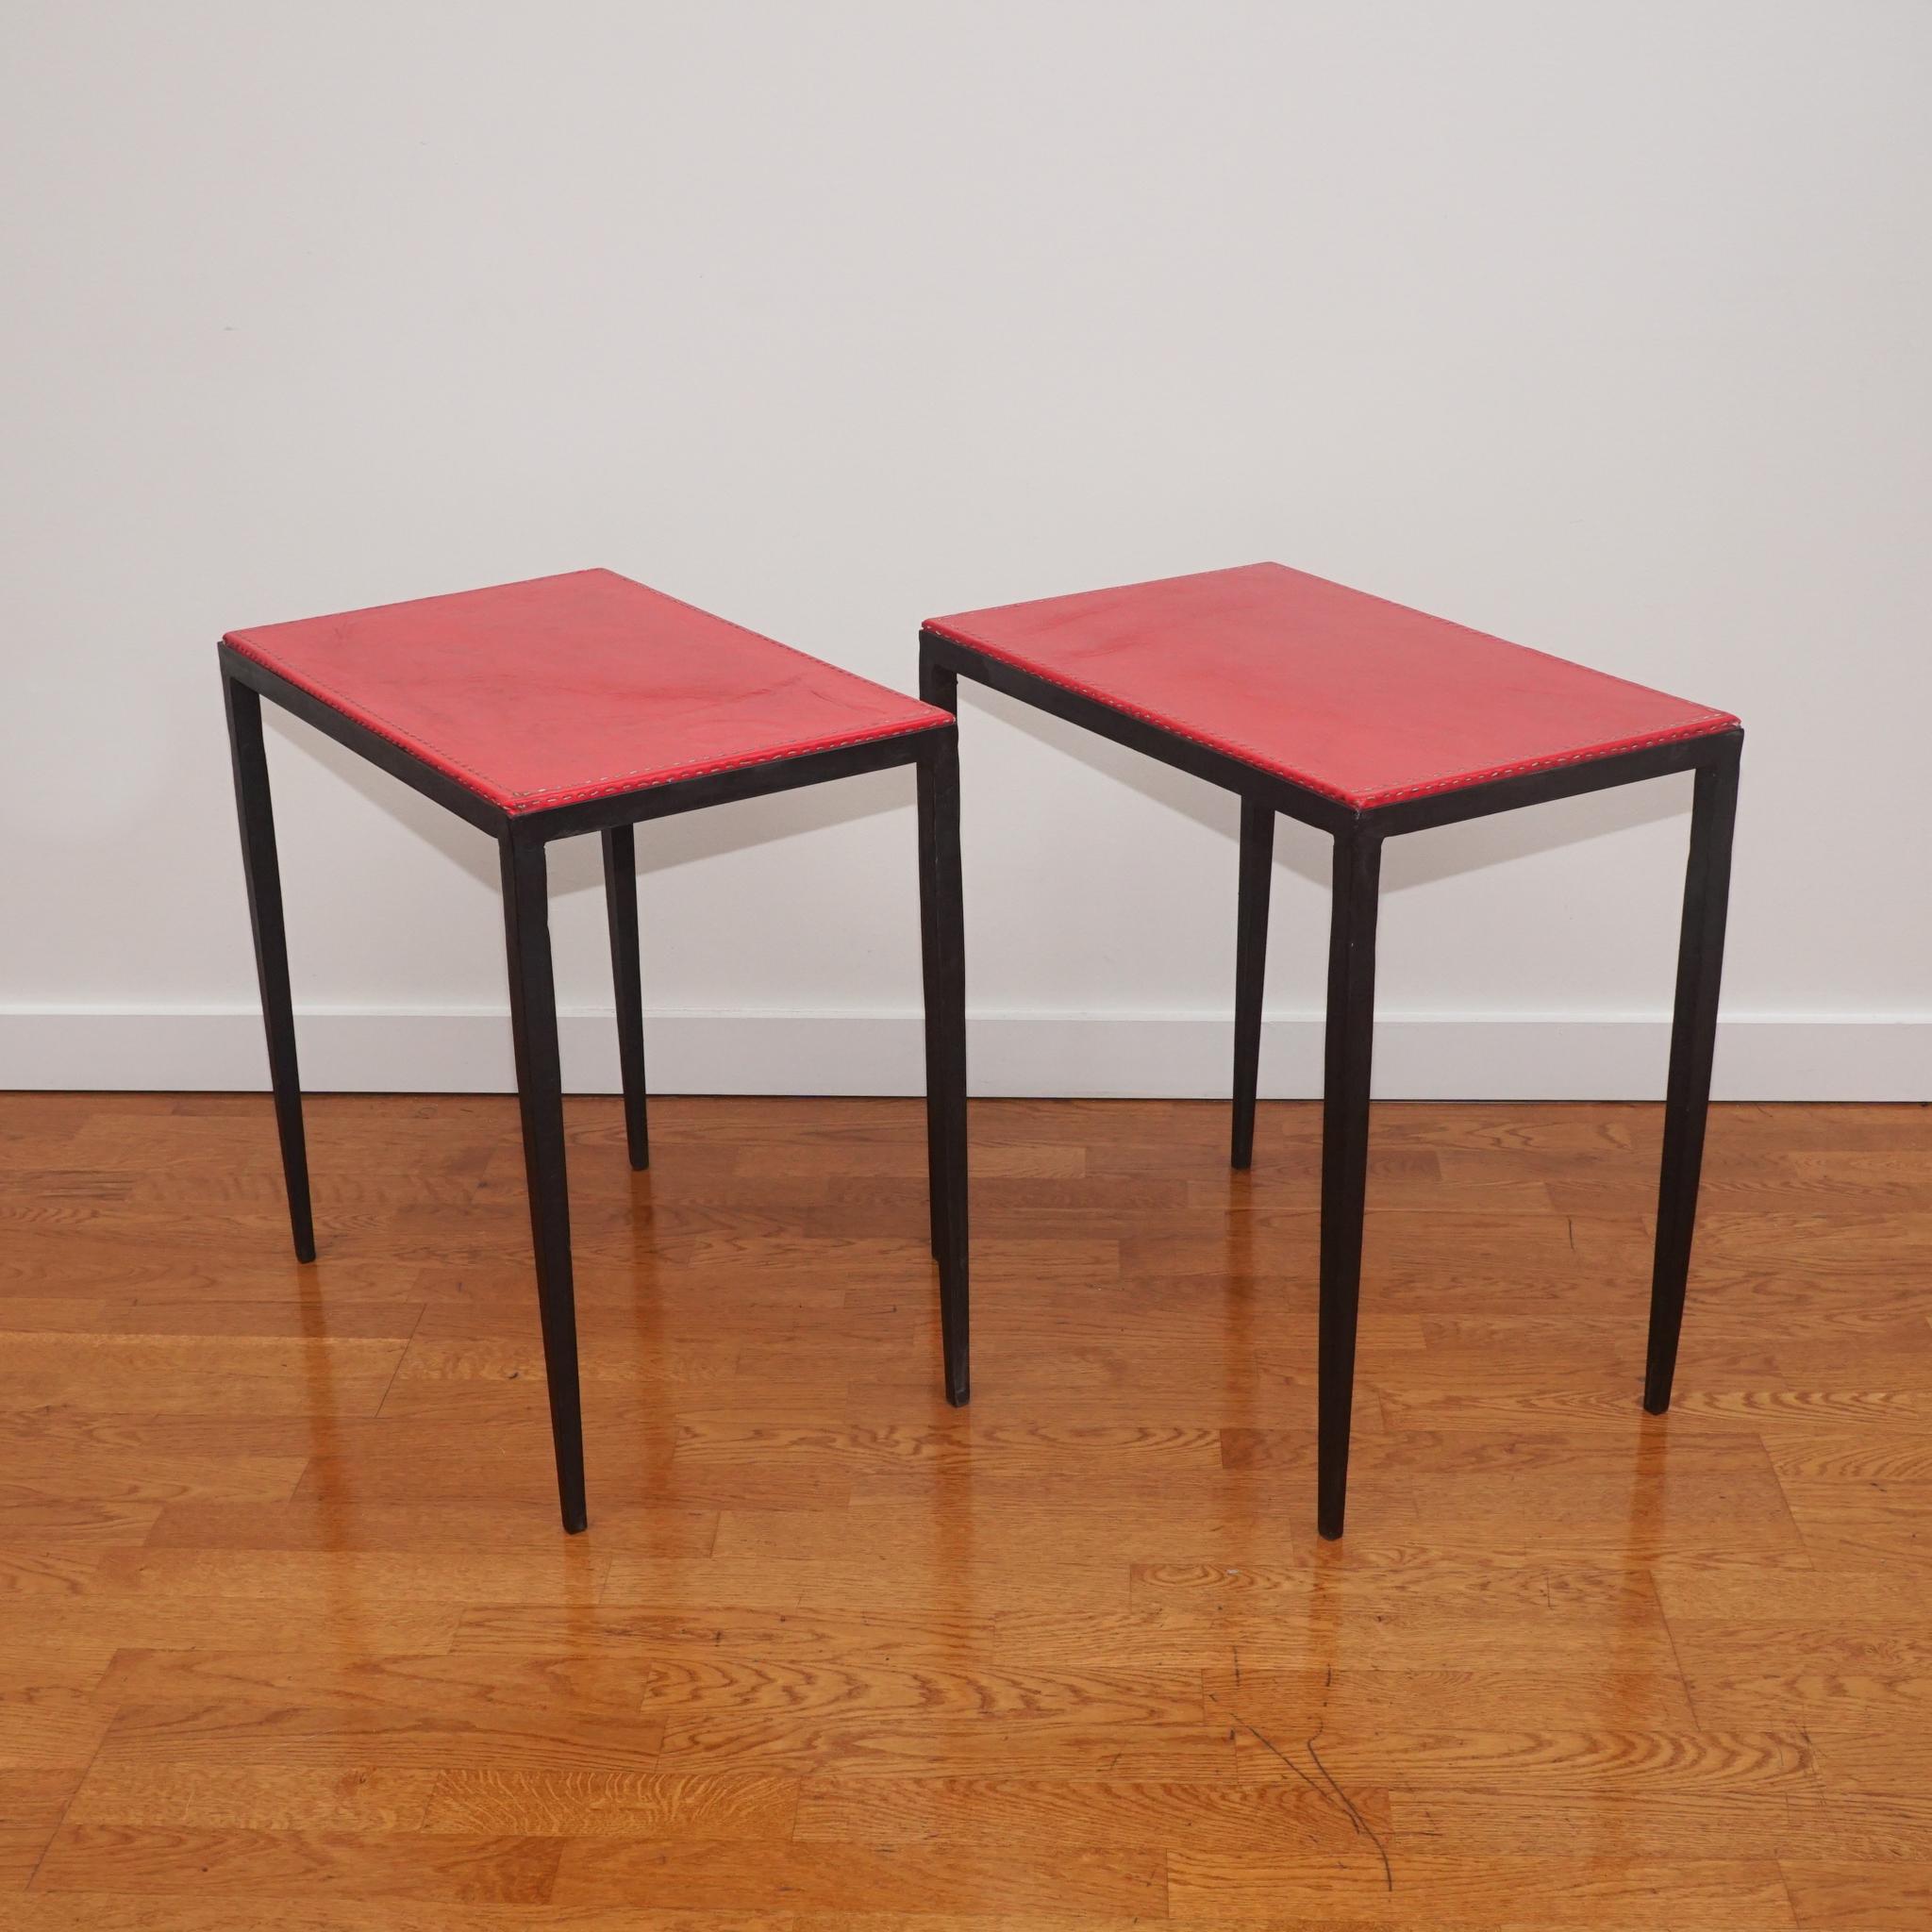 The pair of iron side tables, shown here, are in the style of Jean-Michel Frank. 
Featuring lean, tapered legs and a red leather top with contrast stitching, the side tables are not only distinctive and stylish, but perfectly scaled to sit